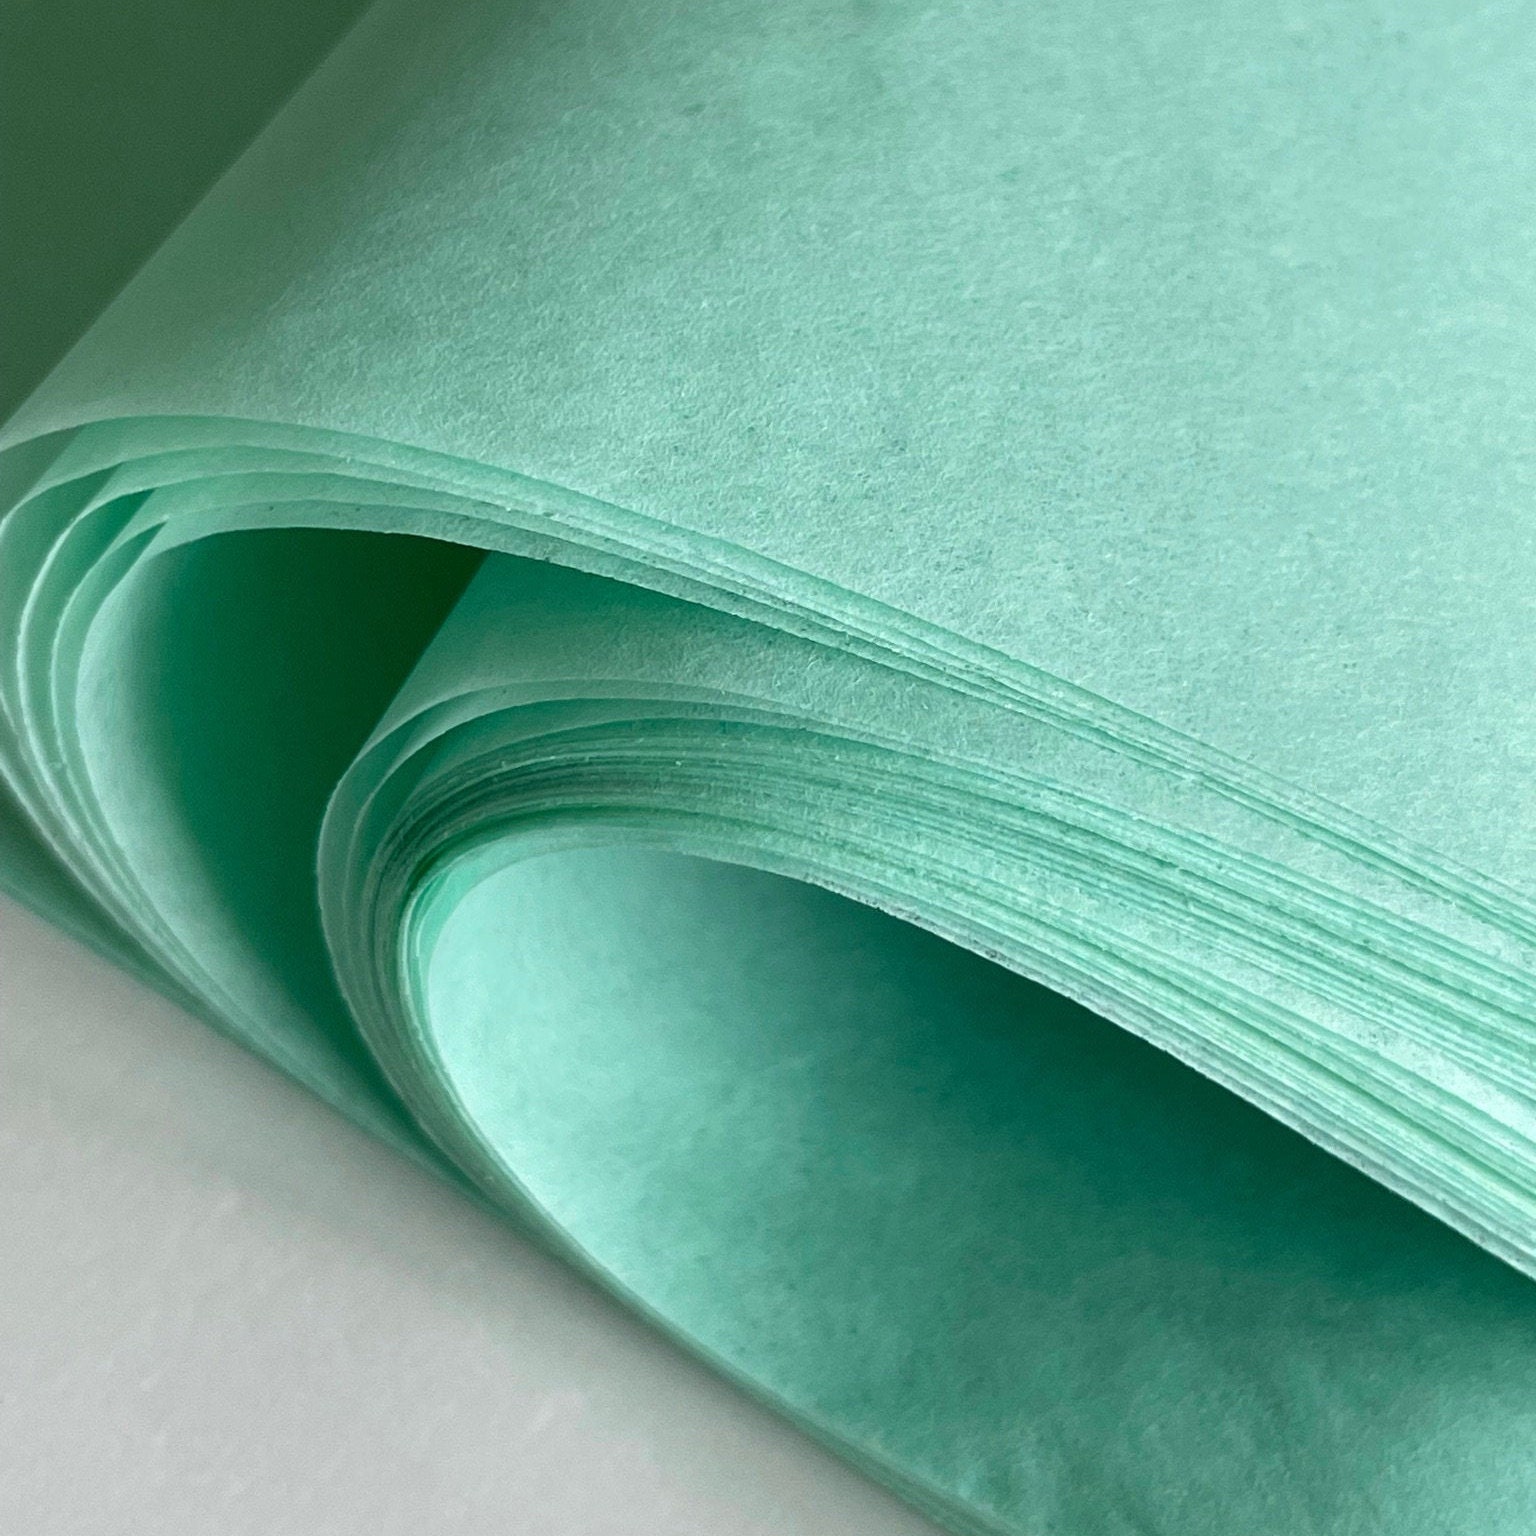 TISSUE PAPER SHEETS Mint Seafoam Green Aqua Teal Blue Retail and Gift  Wrapping Craft Supply Packaging Diy Art Project Decoupage Pompom 